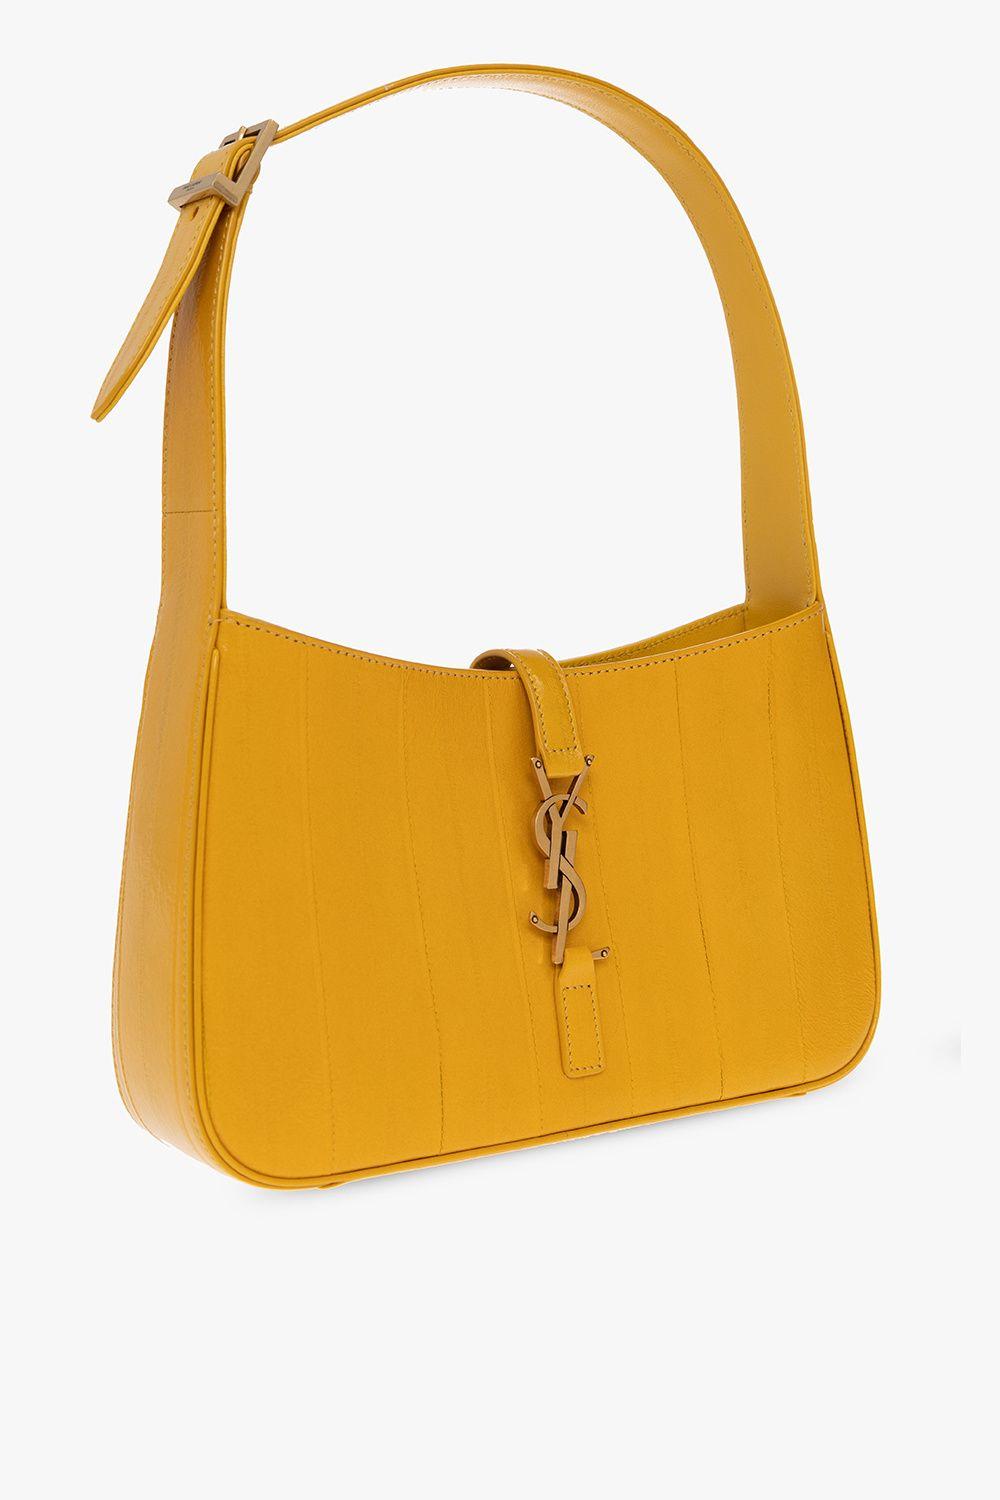 Saint Laurent 'le 5 A 7' Hobo Bag in Yellow | Lyst